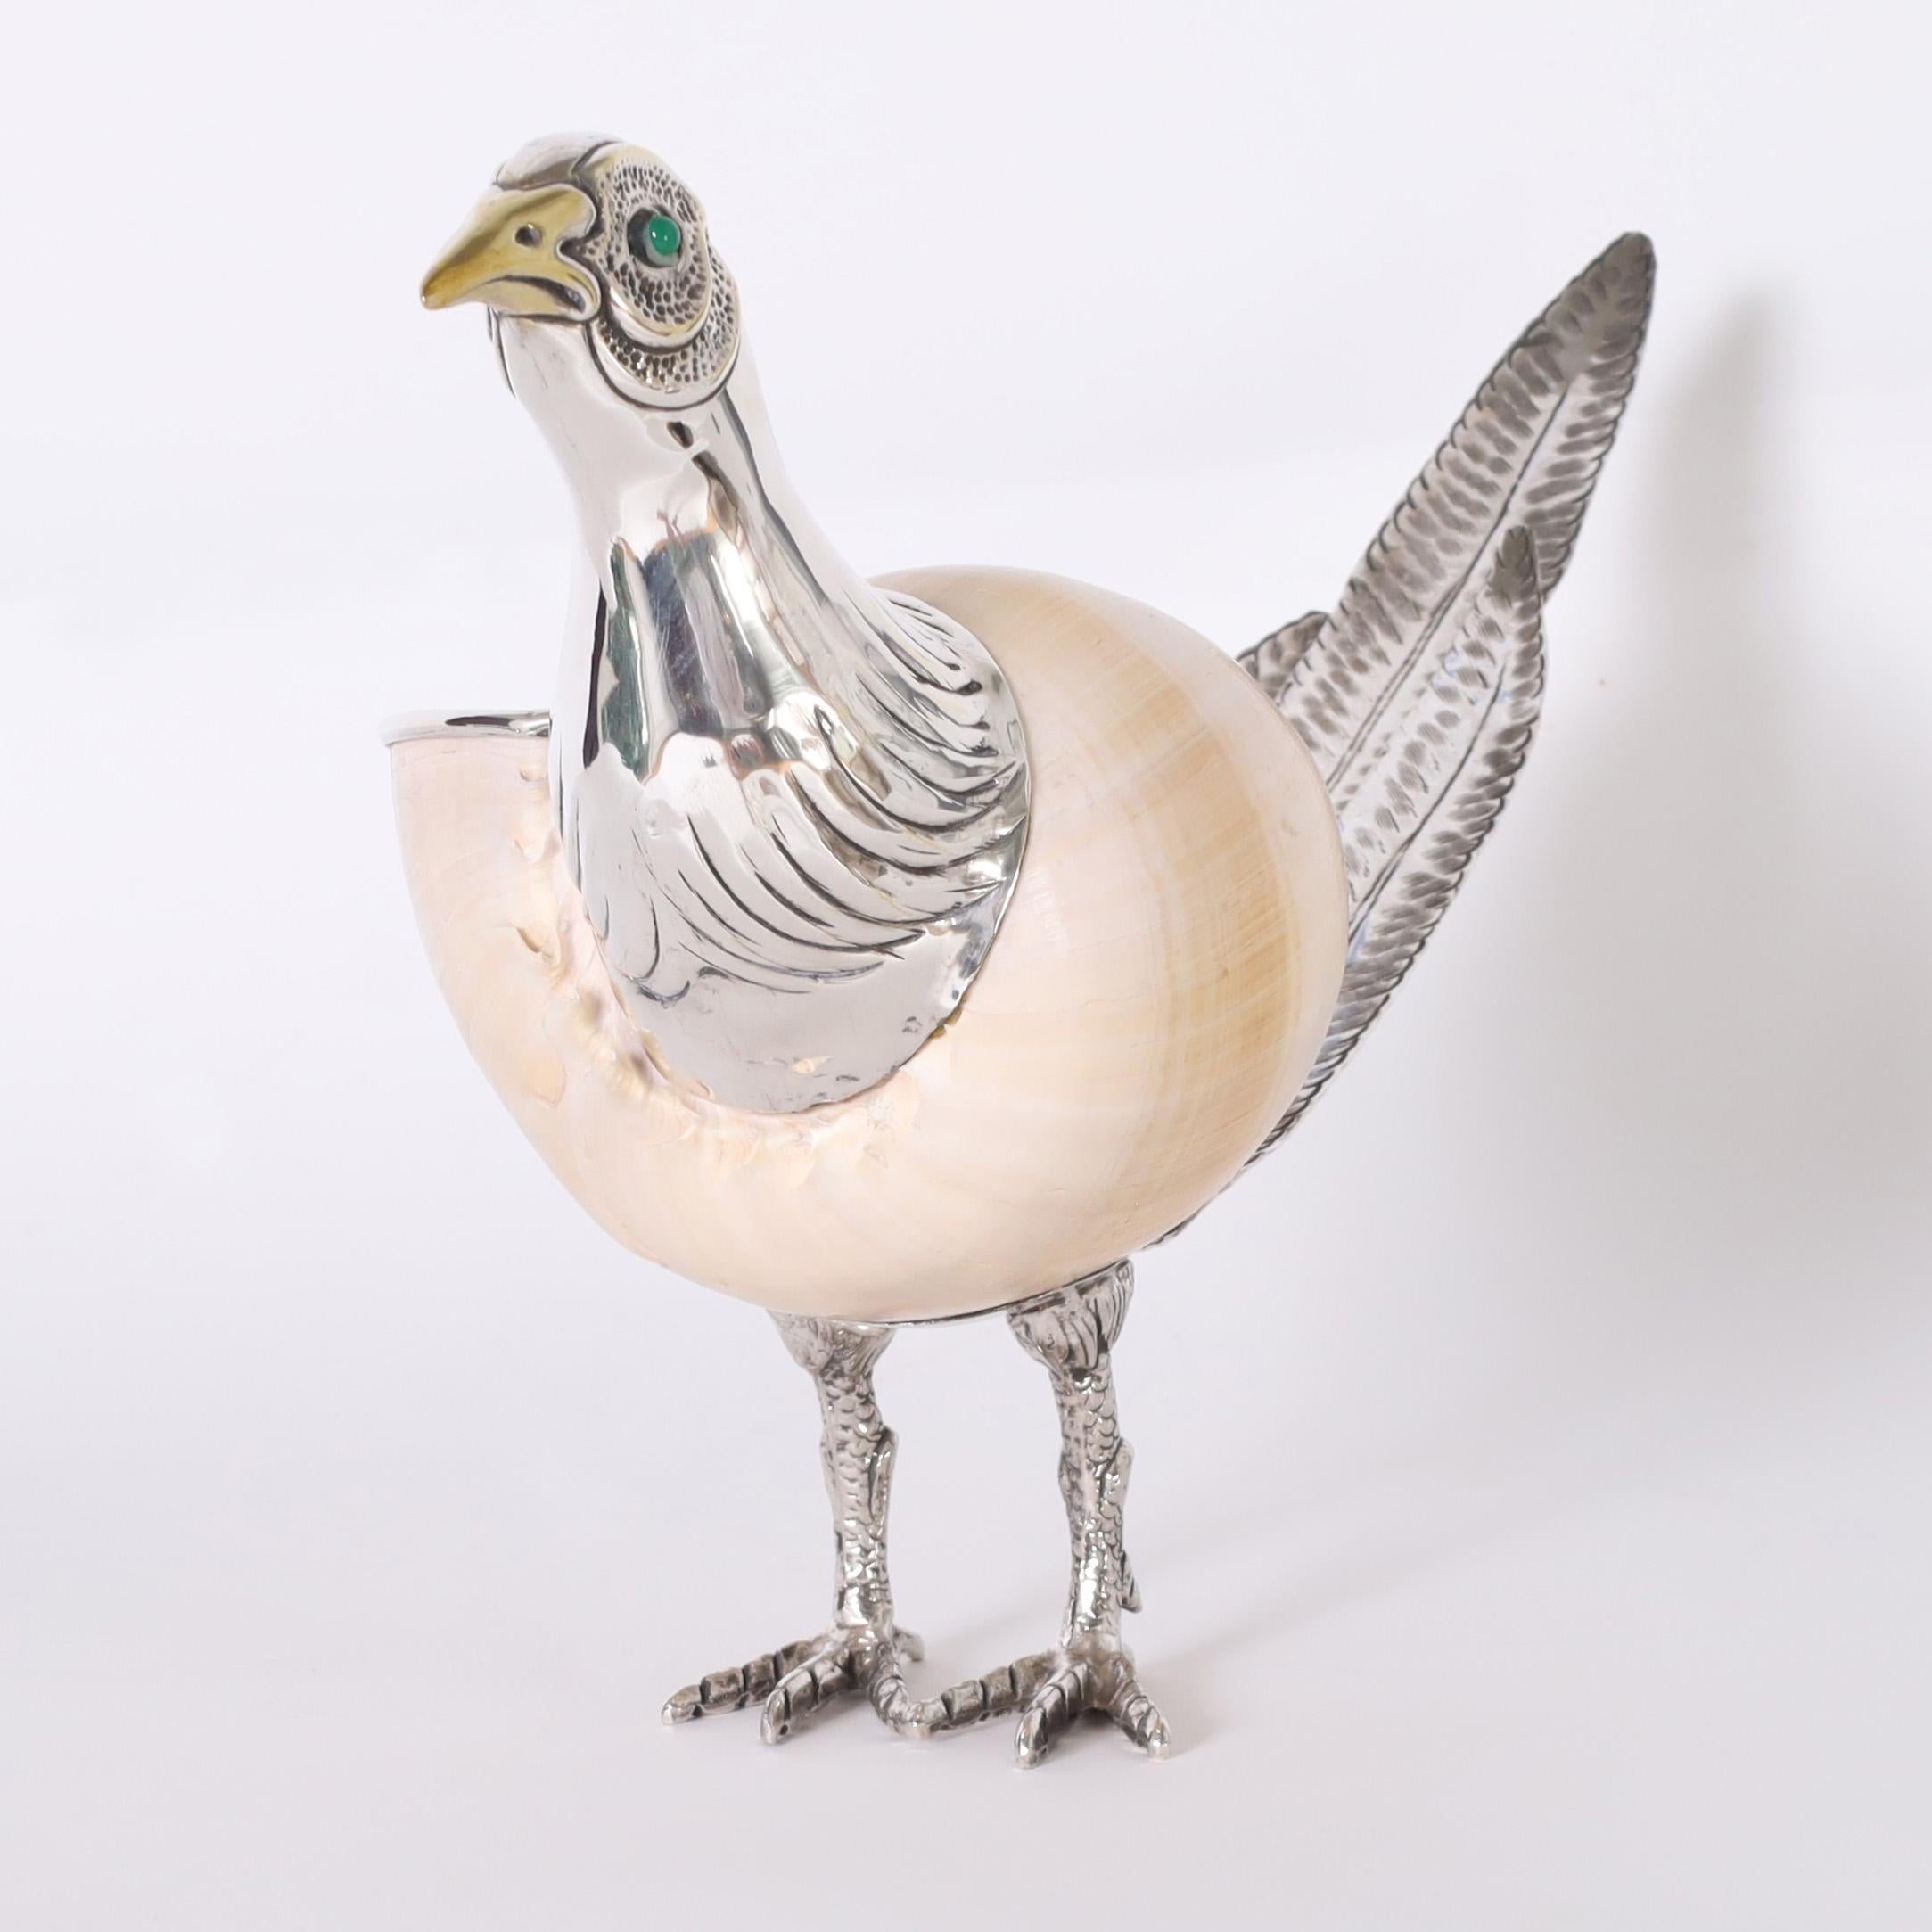 Standout mid century Italian pheasant sculpture crafted with a conch shell ambitiously enhanced with silver plated brass head, tail, feet and quizzical expression. Signed Binazzi on the bottom.